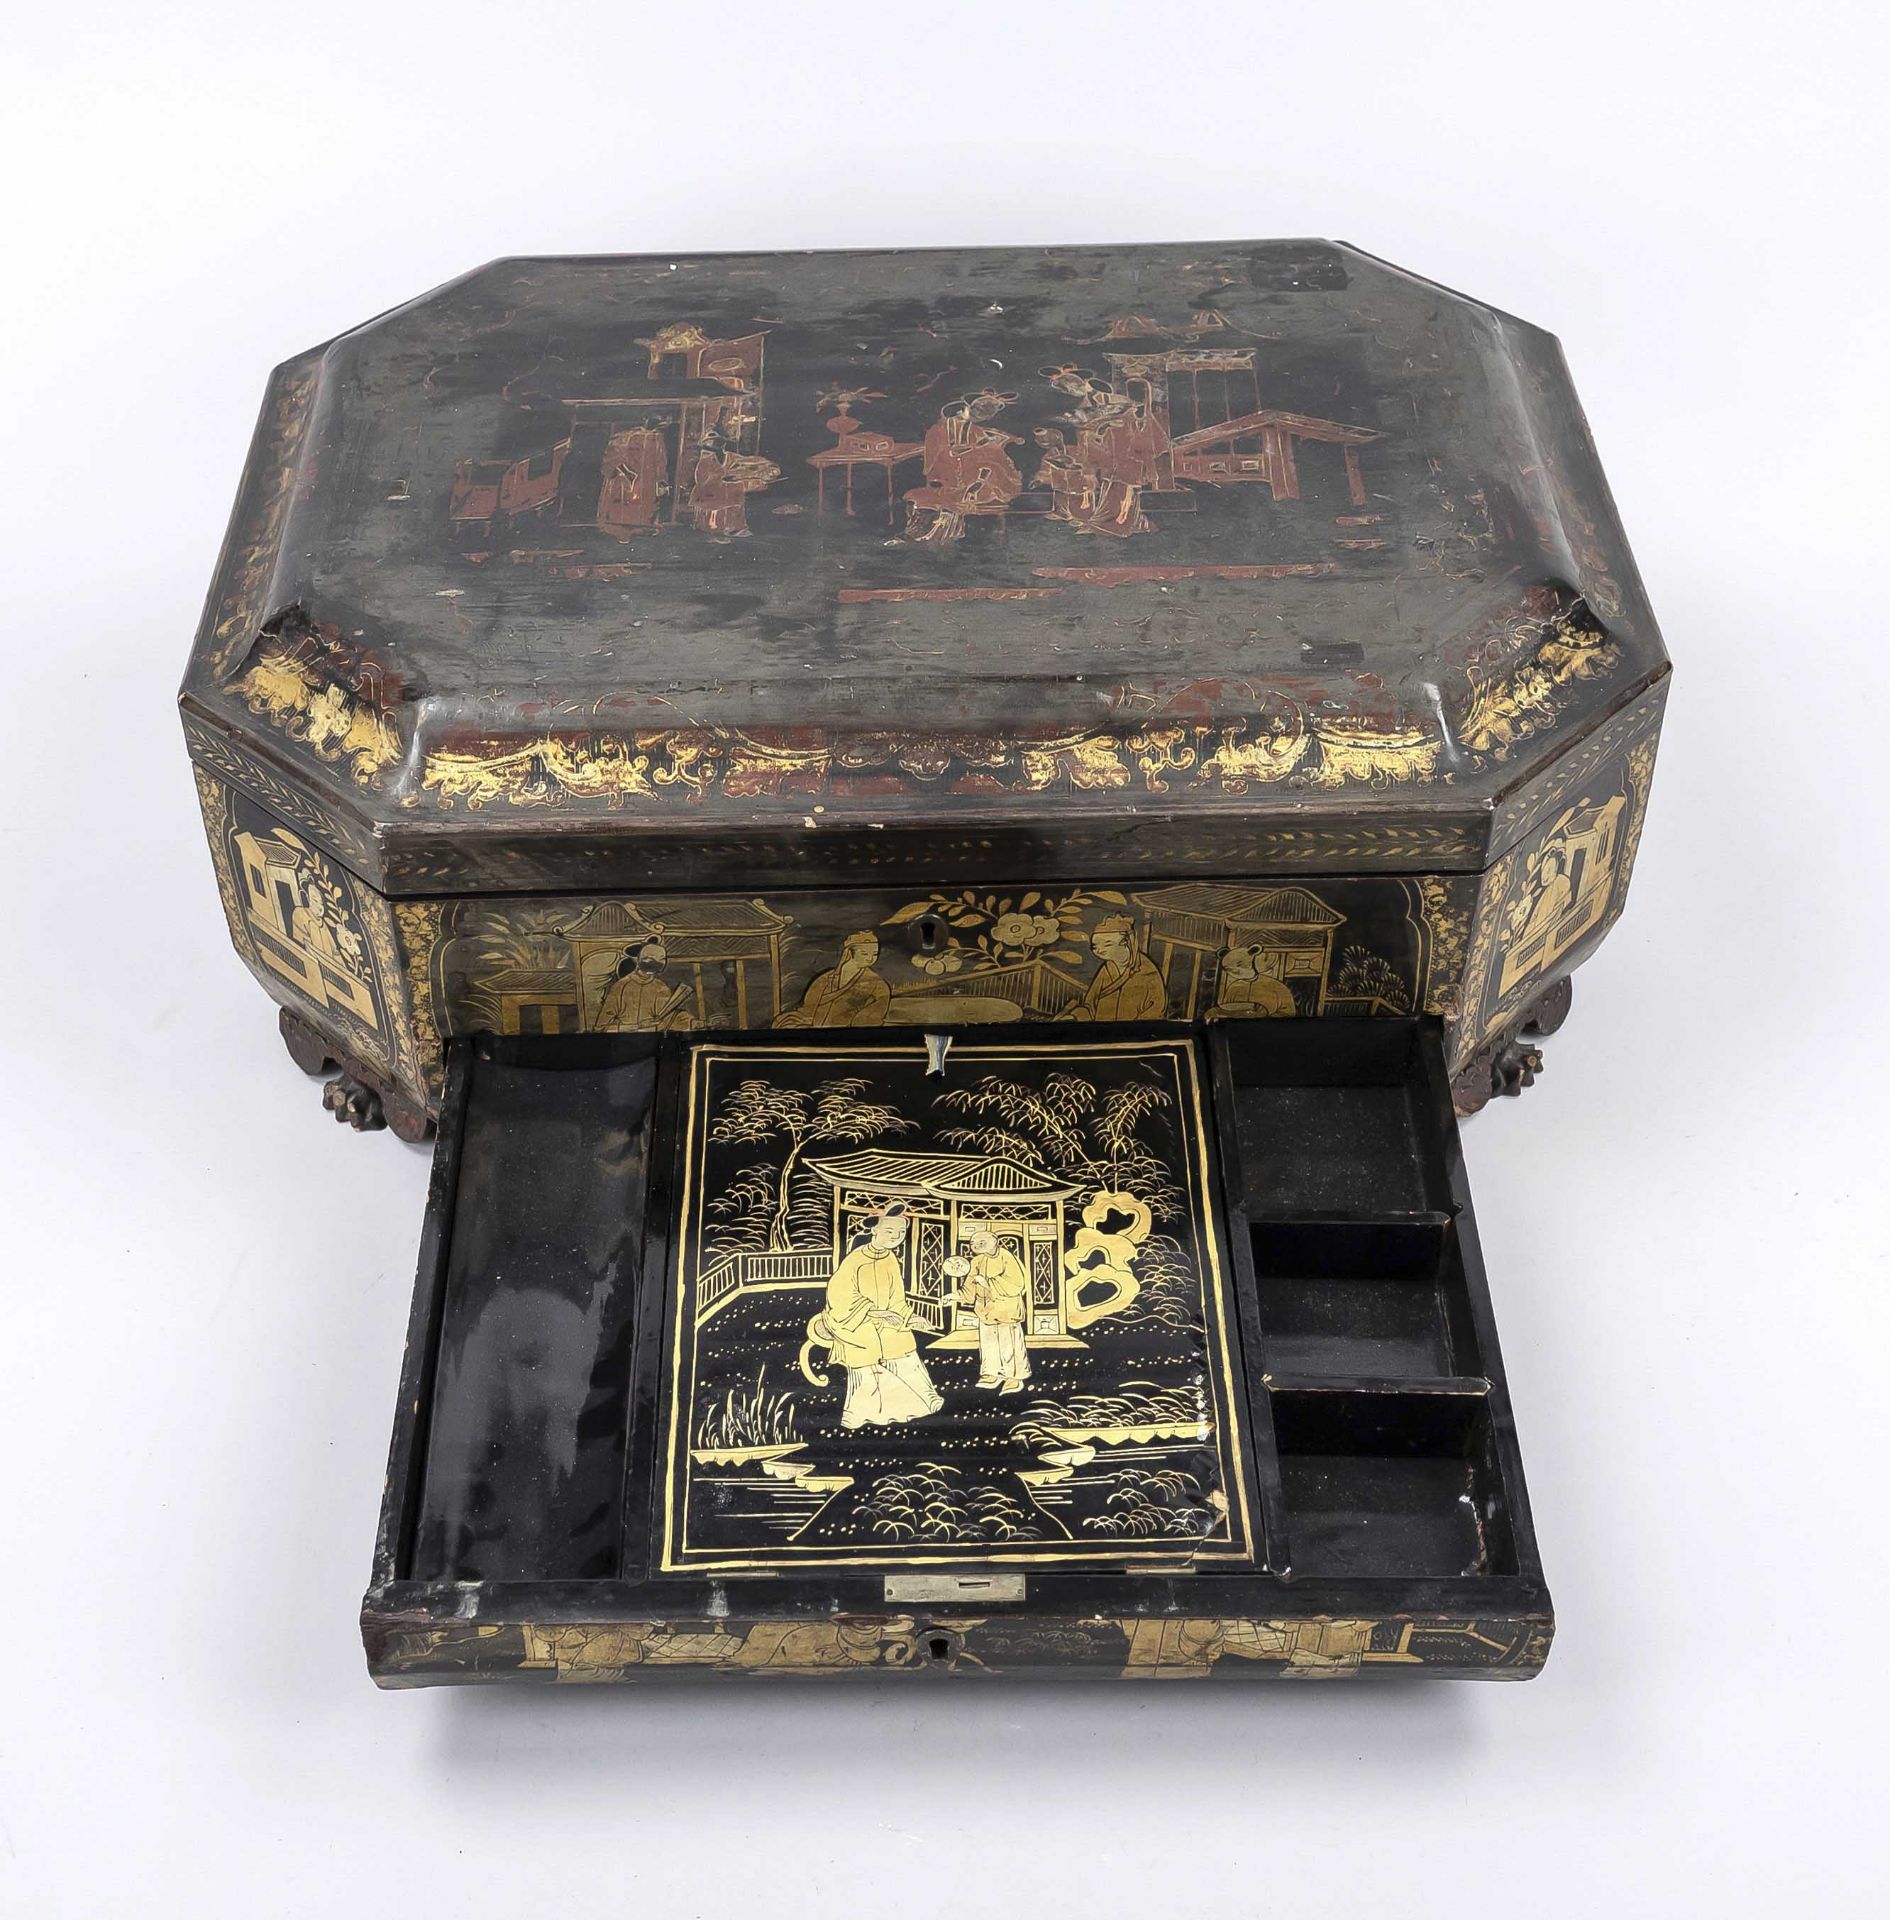 Large sewing box Canton lacquer, South China, Qing dynasty (1644-1911), 19th century, 8-sided wooden - Image 2 of 2